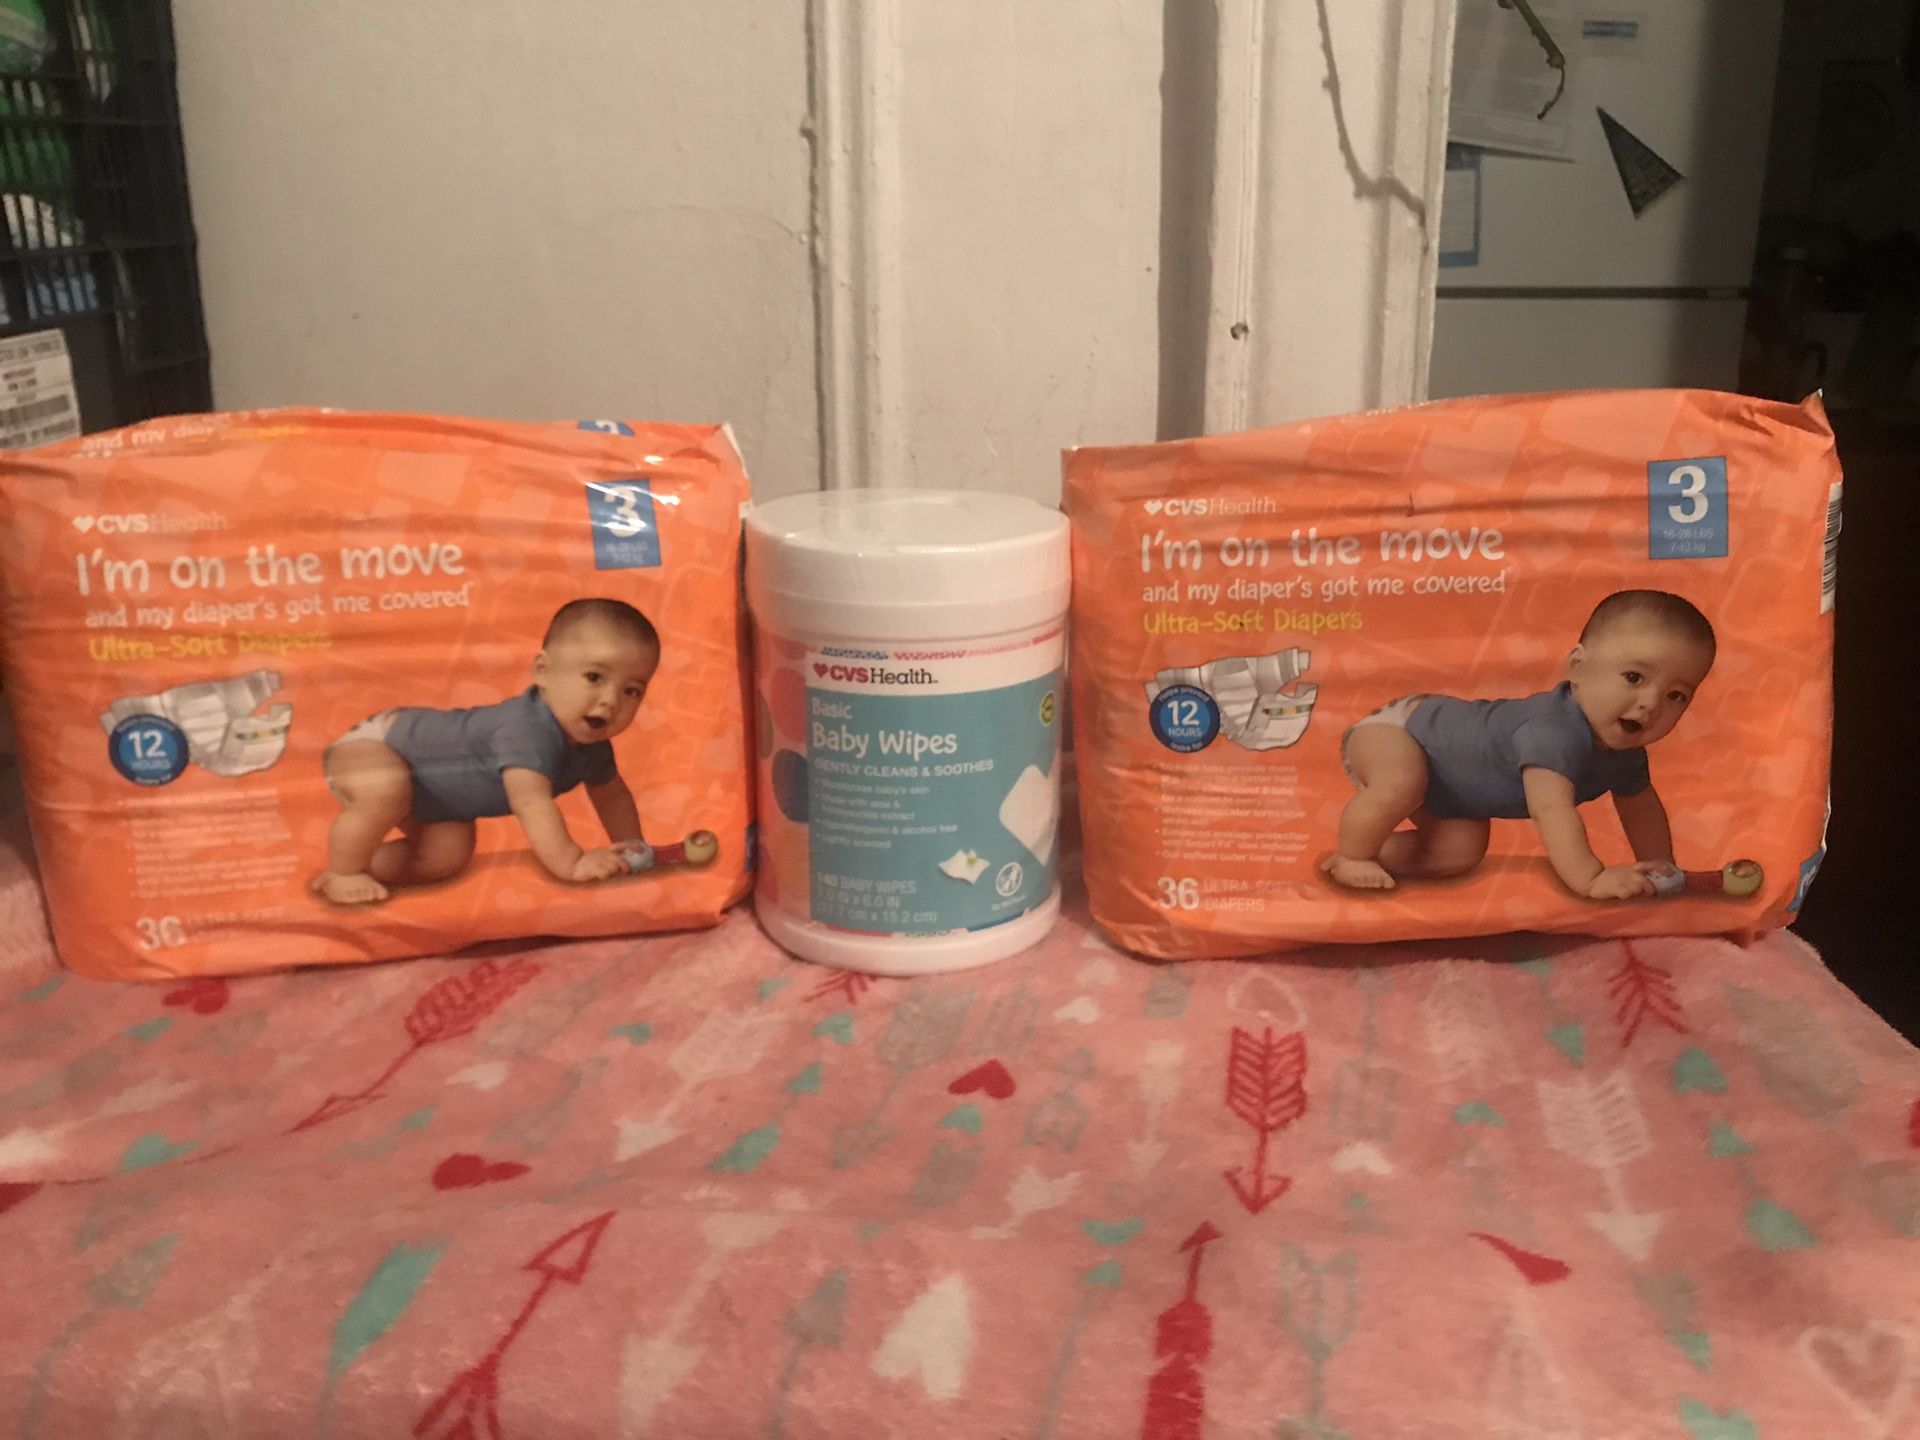 Diapers and wipes deal